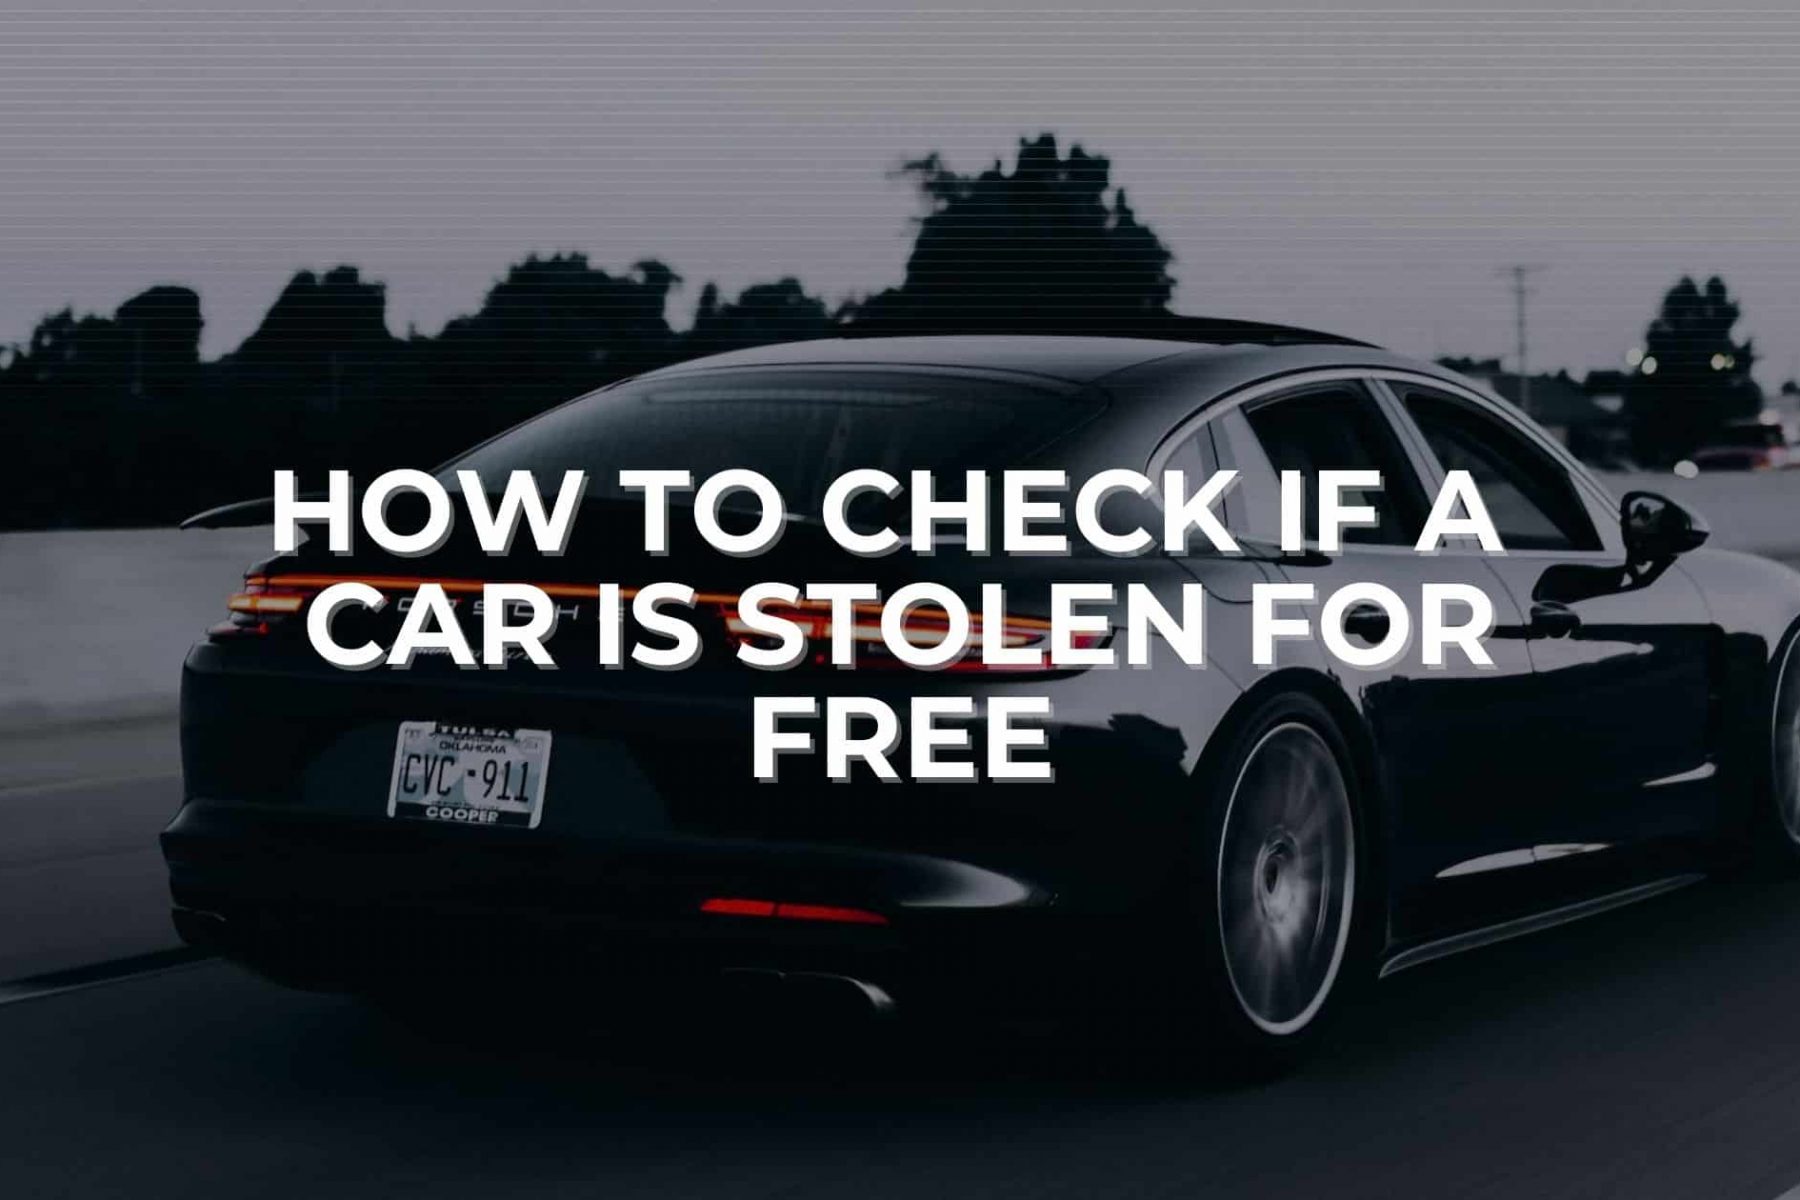 How to check if a vehicle is stolen for free